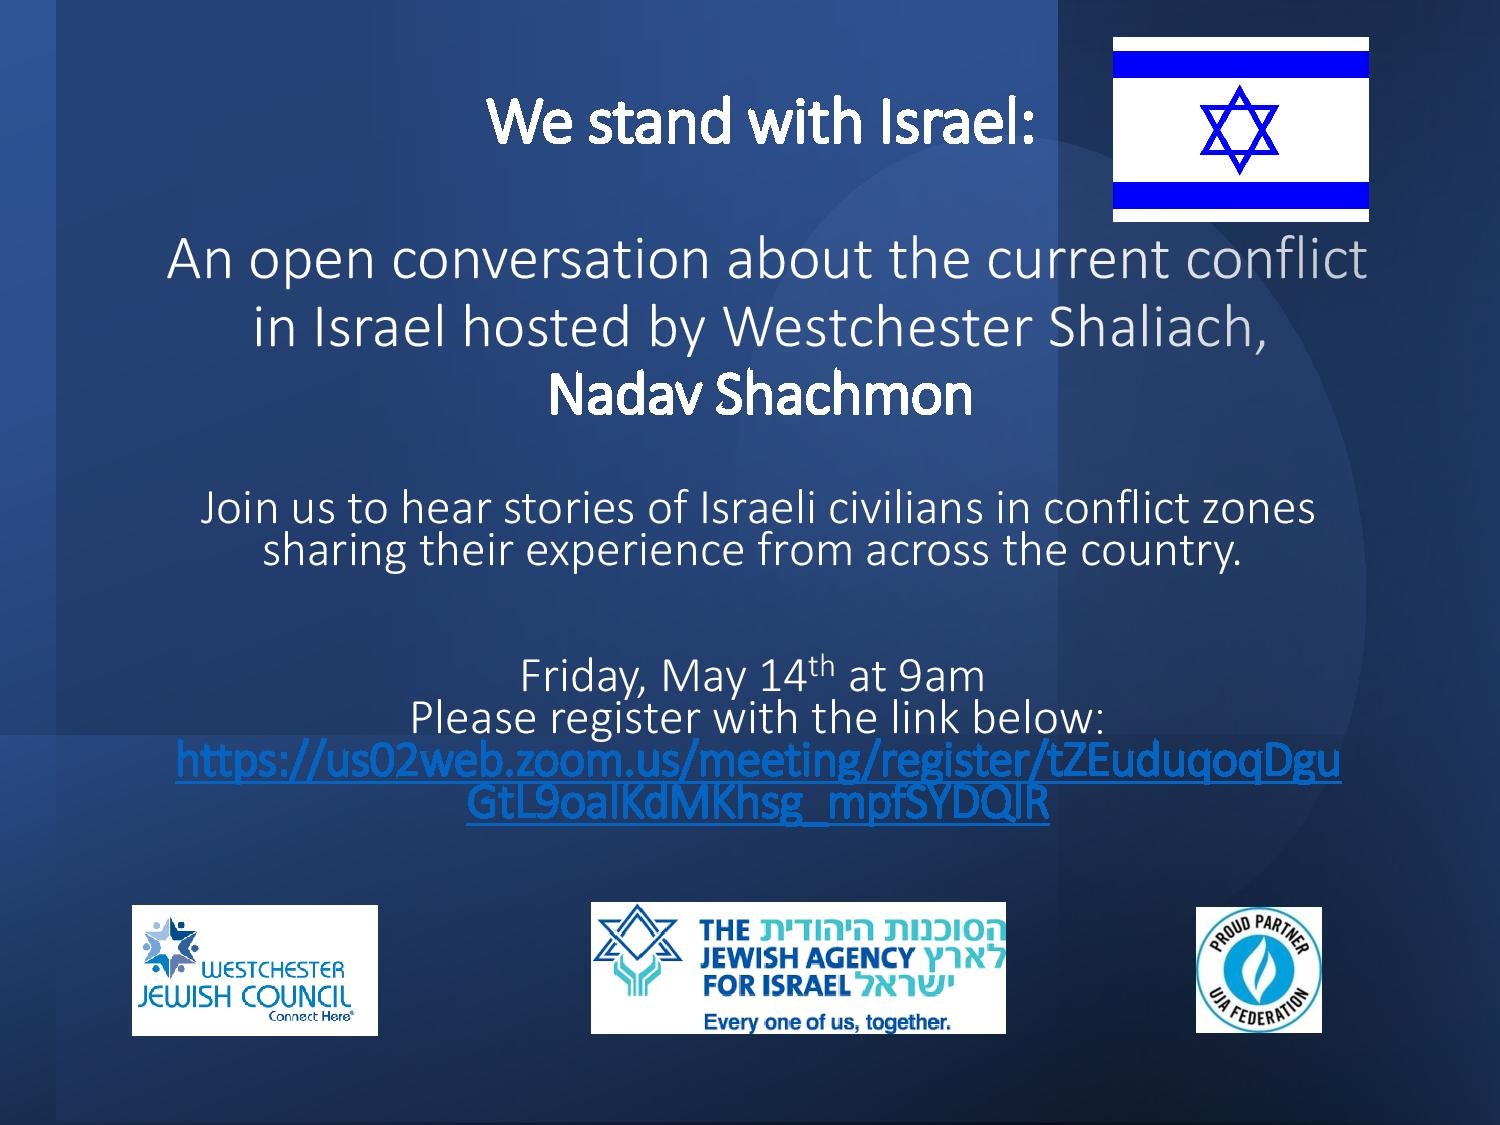 An Open Conversation about current conflict in Israel with Nadav Shachmon